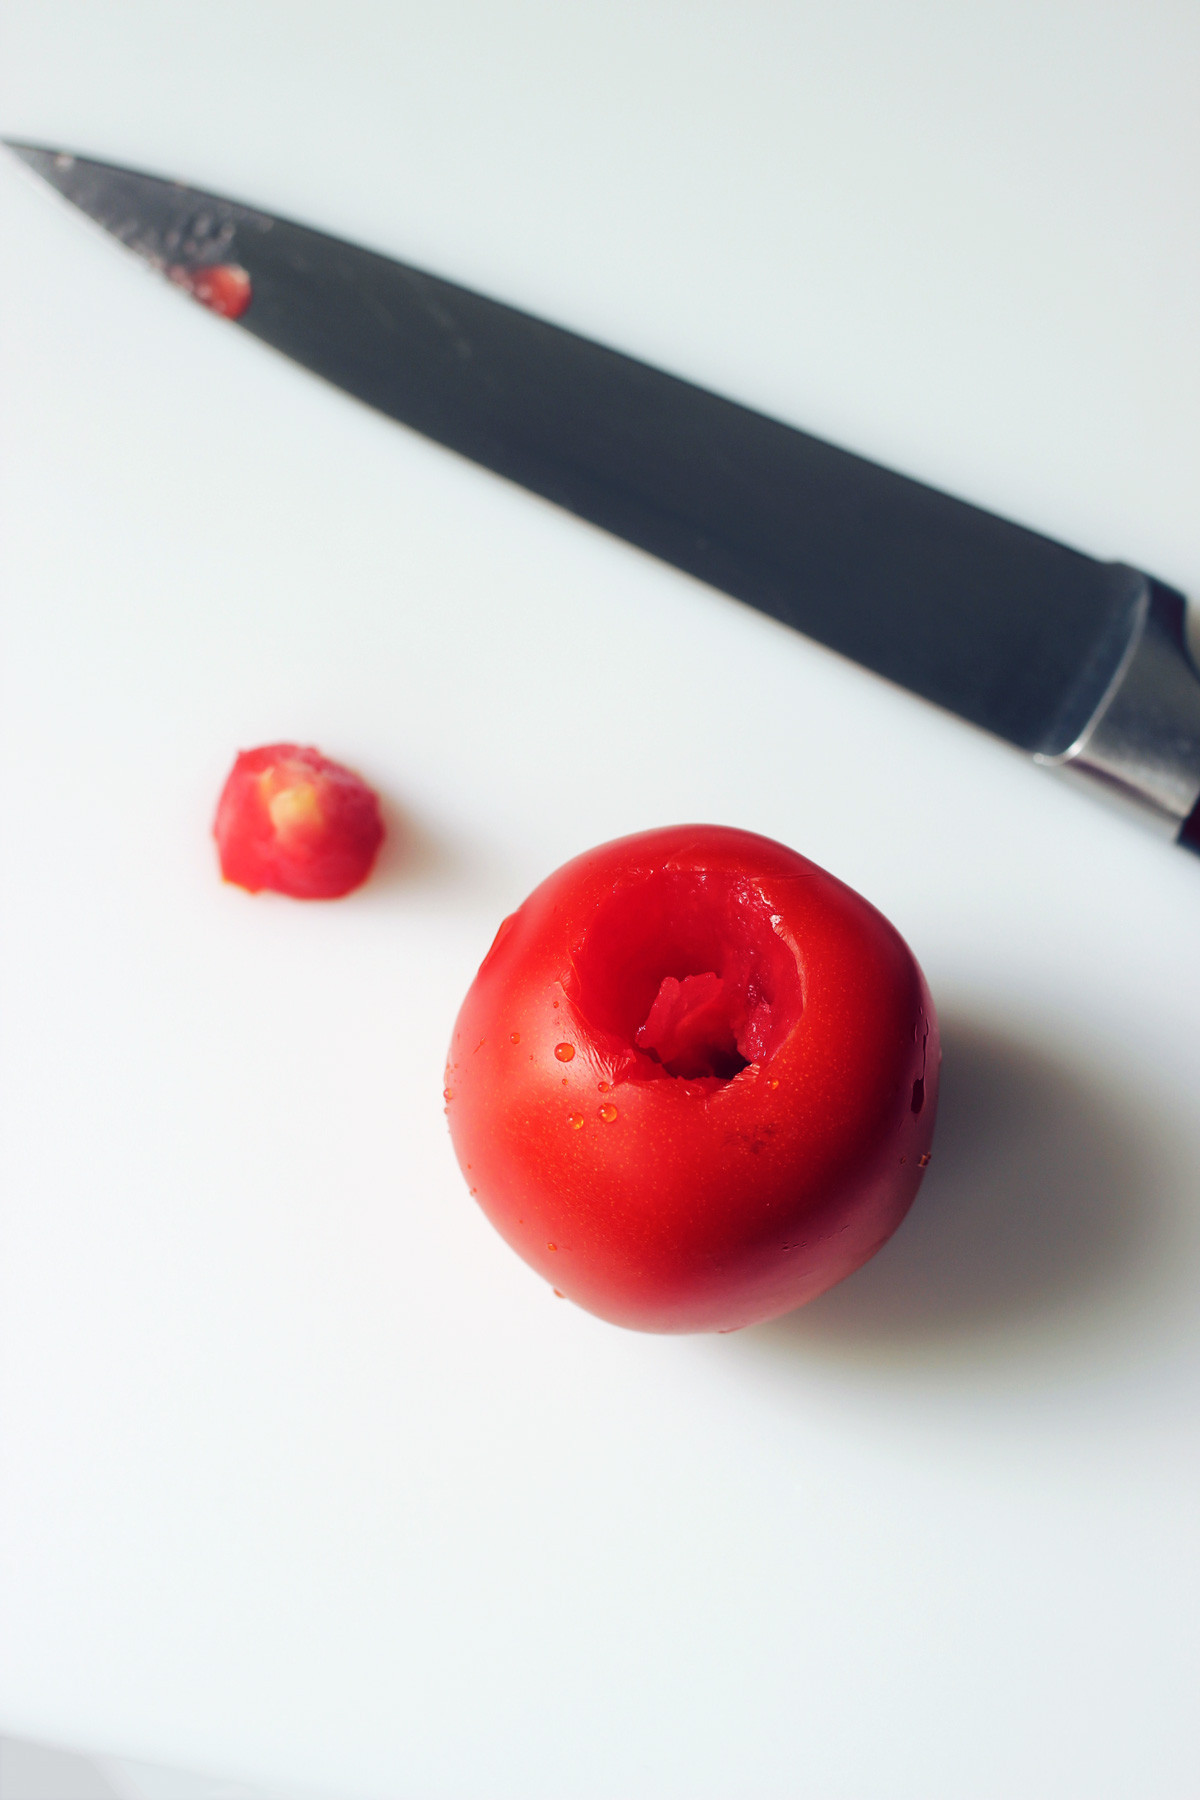 cored tomato on white cutting board with knife and core